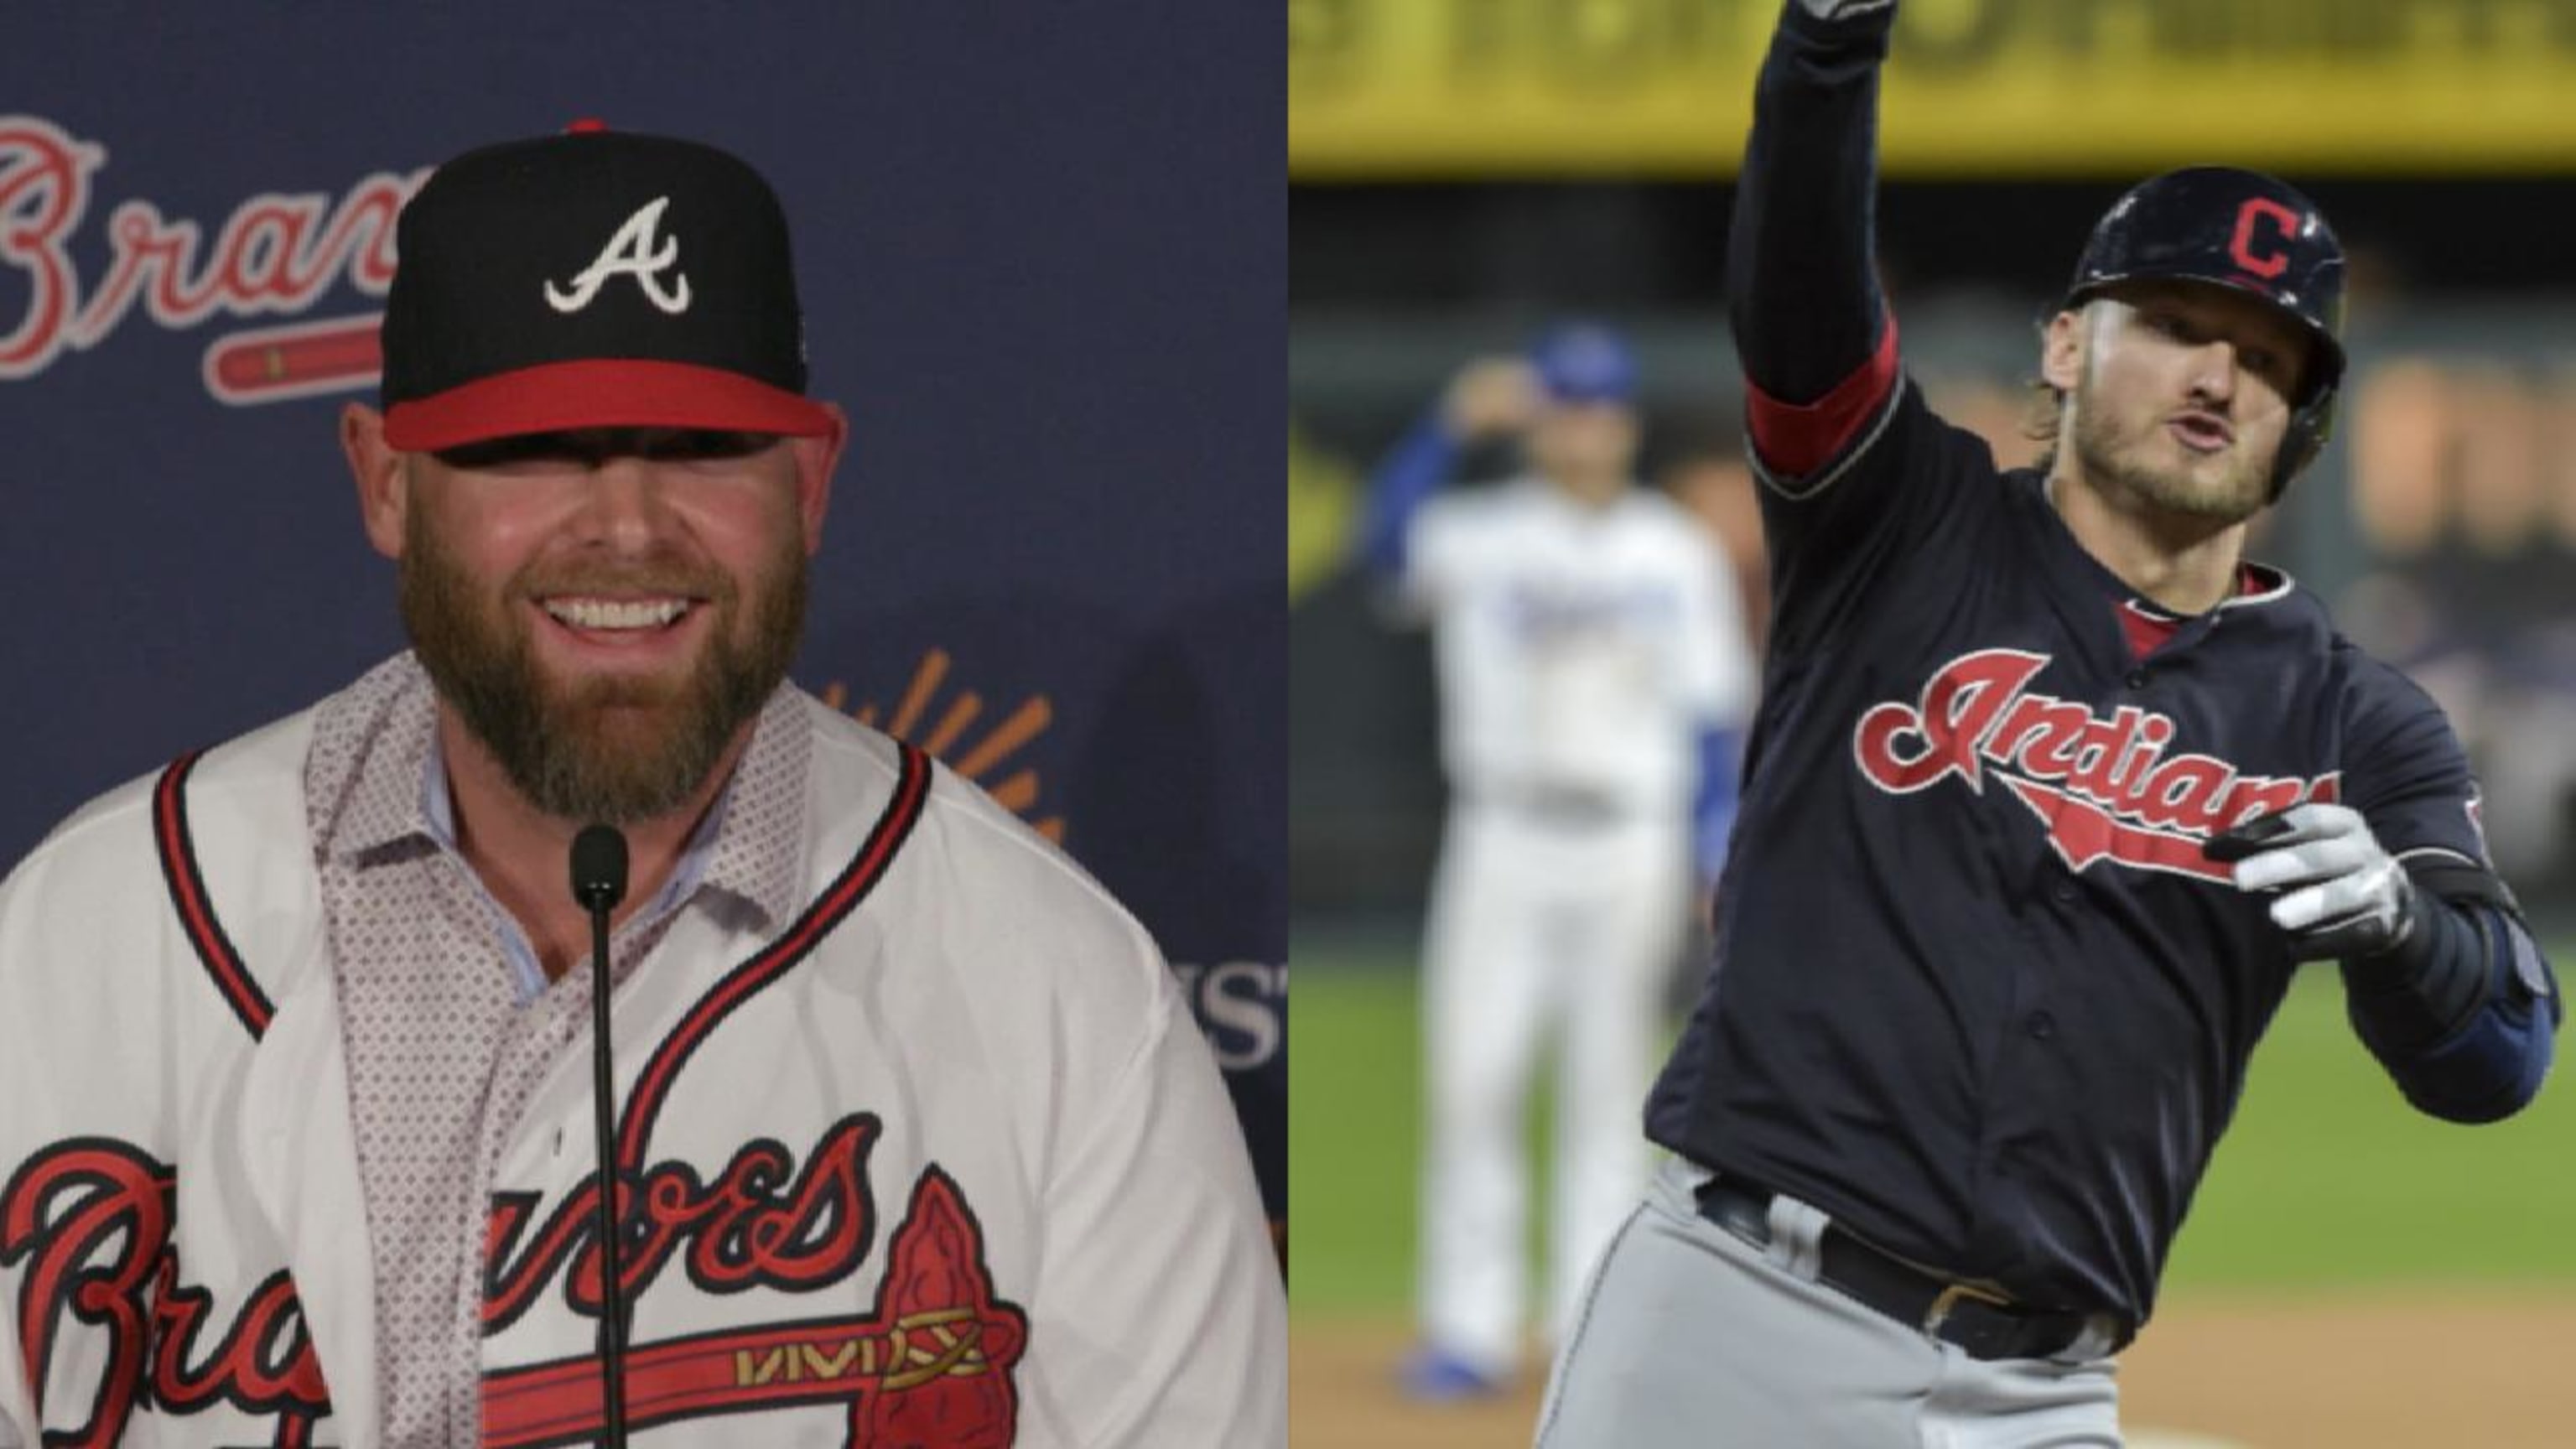 Braves' Brian McCann tells an amazing story about his days with